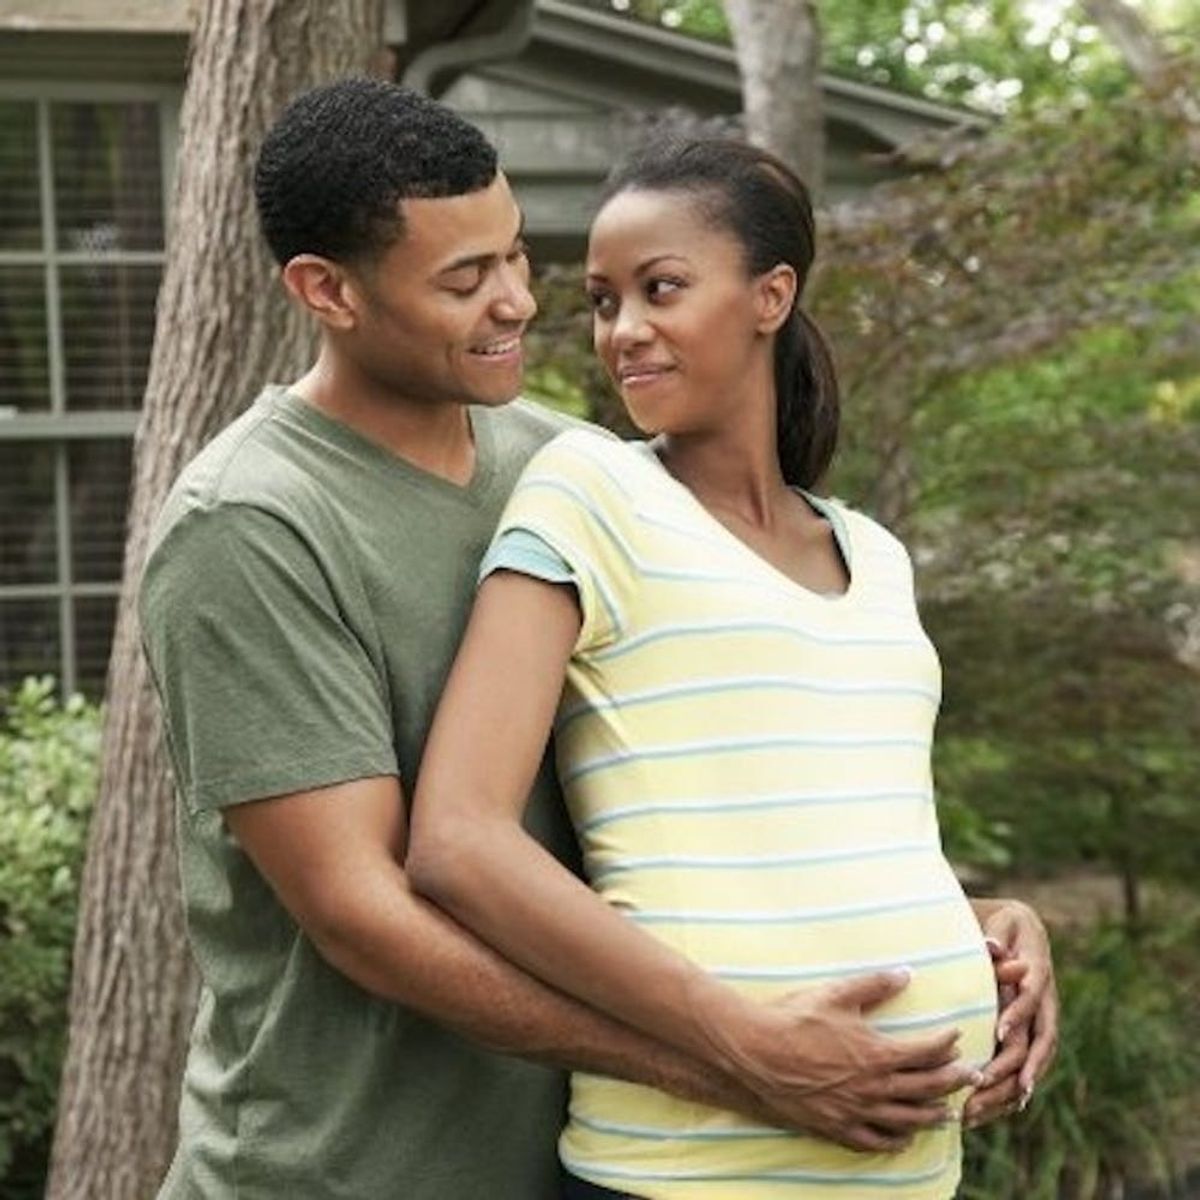 5 Things About Pregnancy You Need to Tell Your S.O.